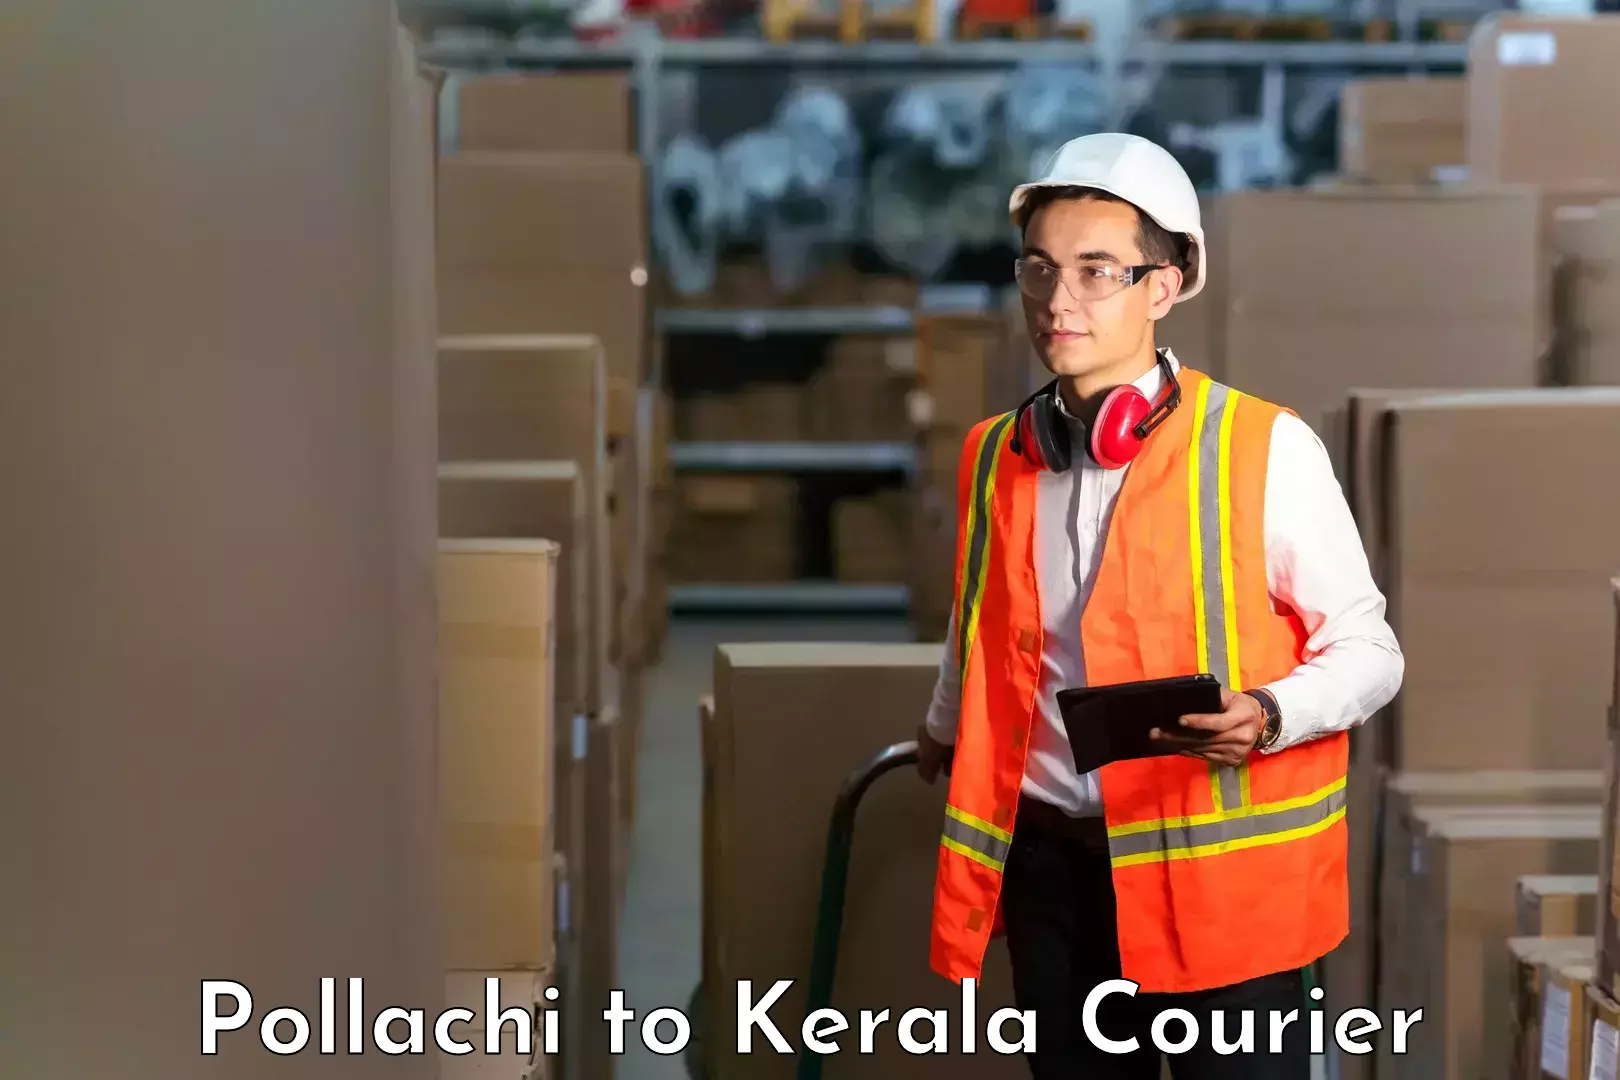 Reliable parcel services Pollachi to Cochin Port Kochi